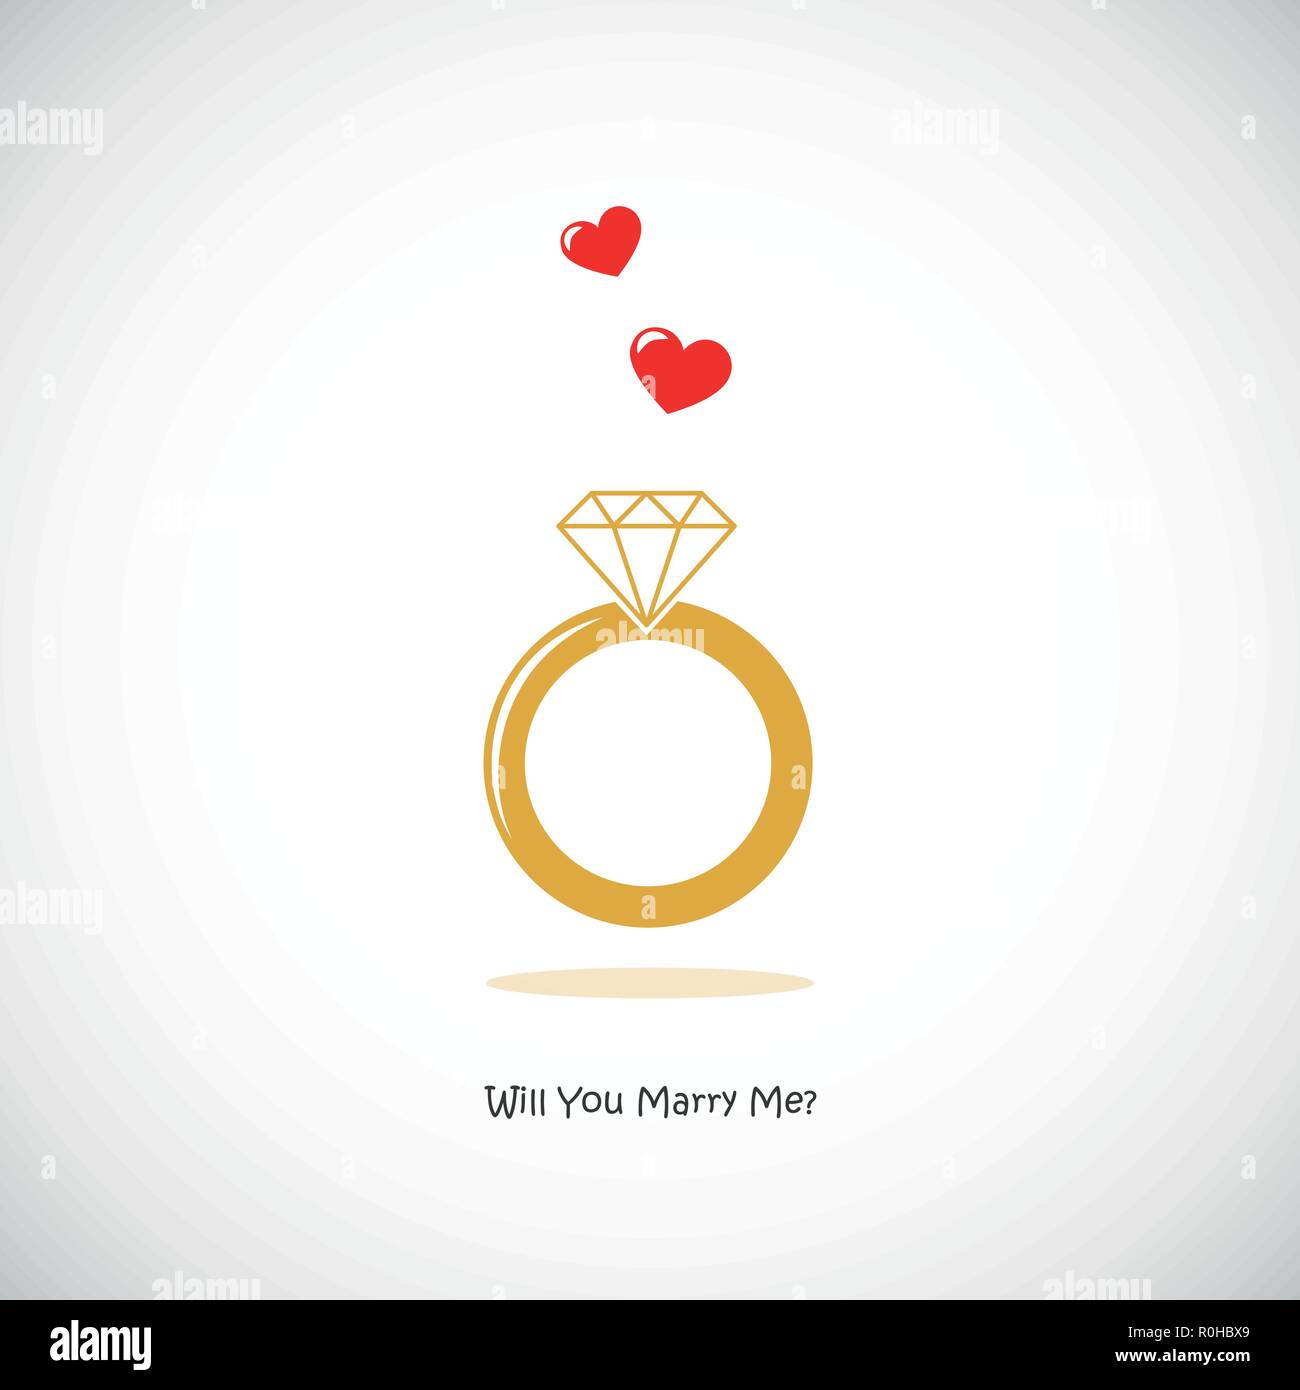 will you marry me wedding ring icon pictogram vector illustration EPS10 Stock Vector